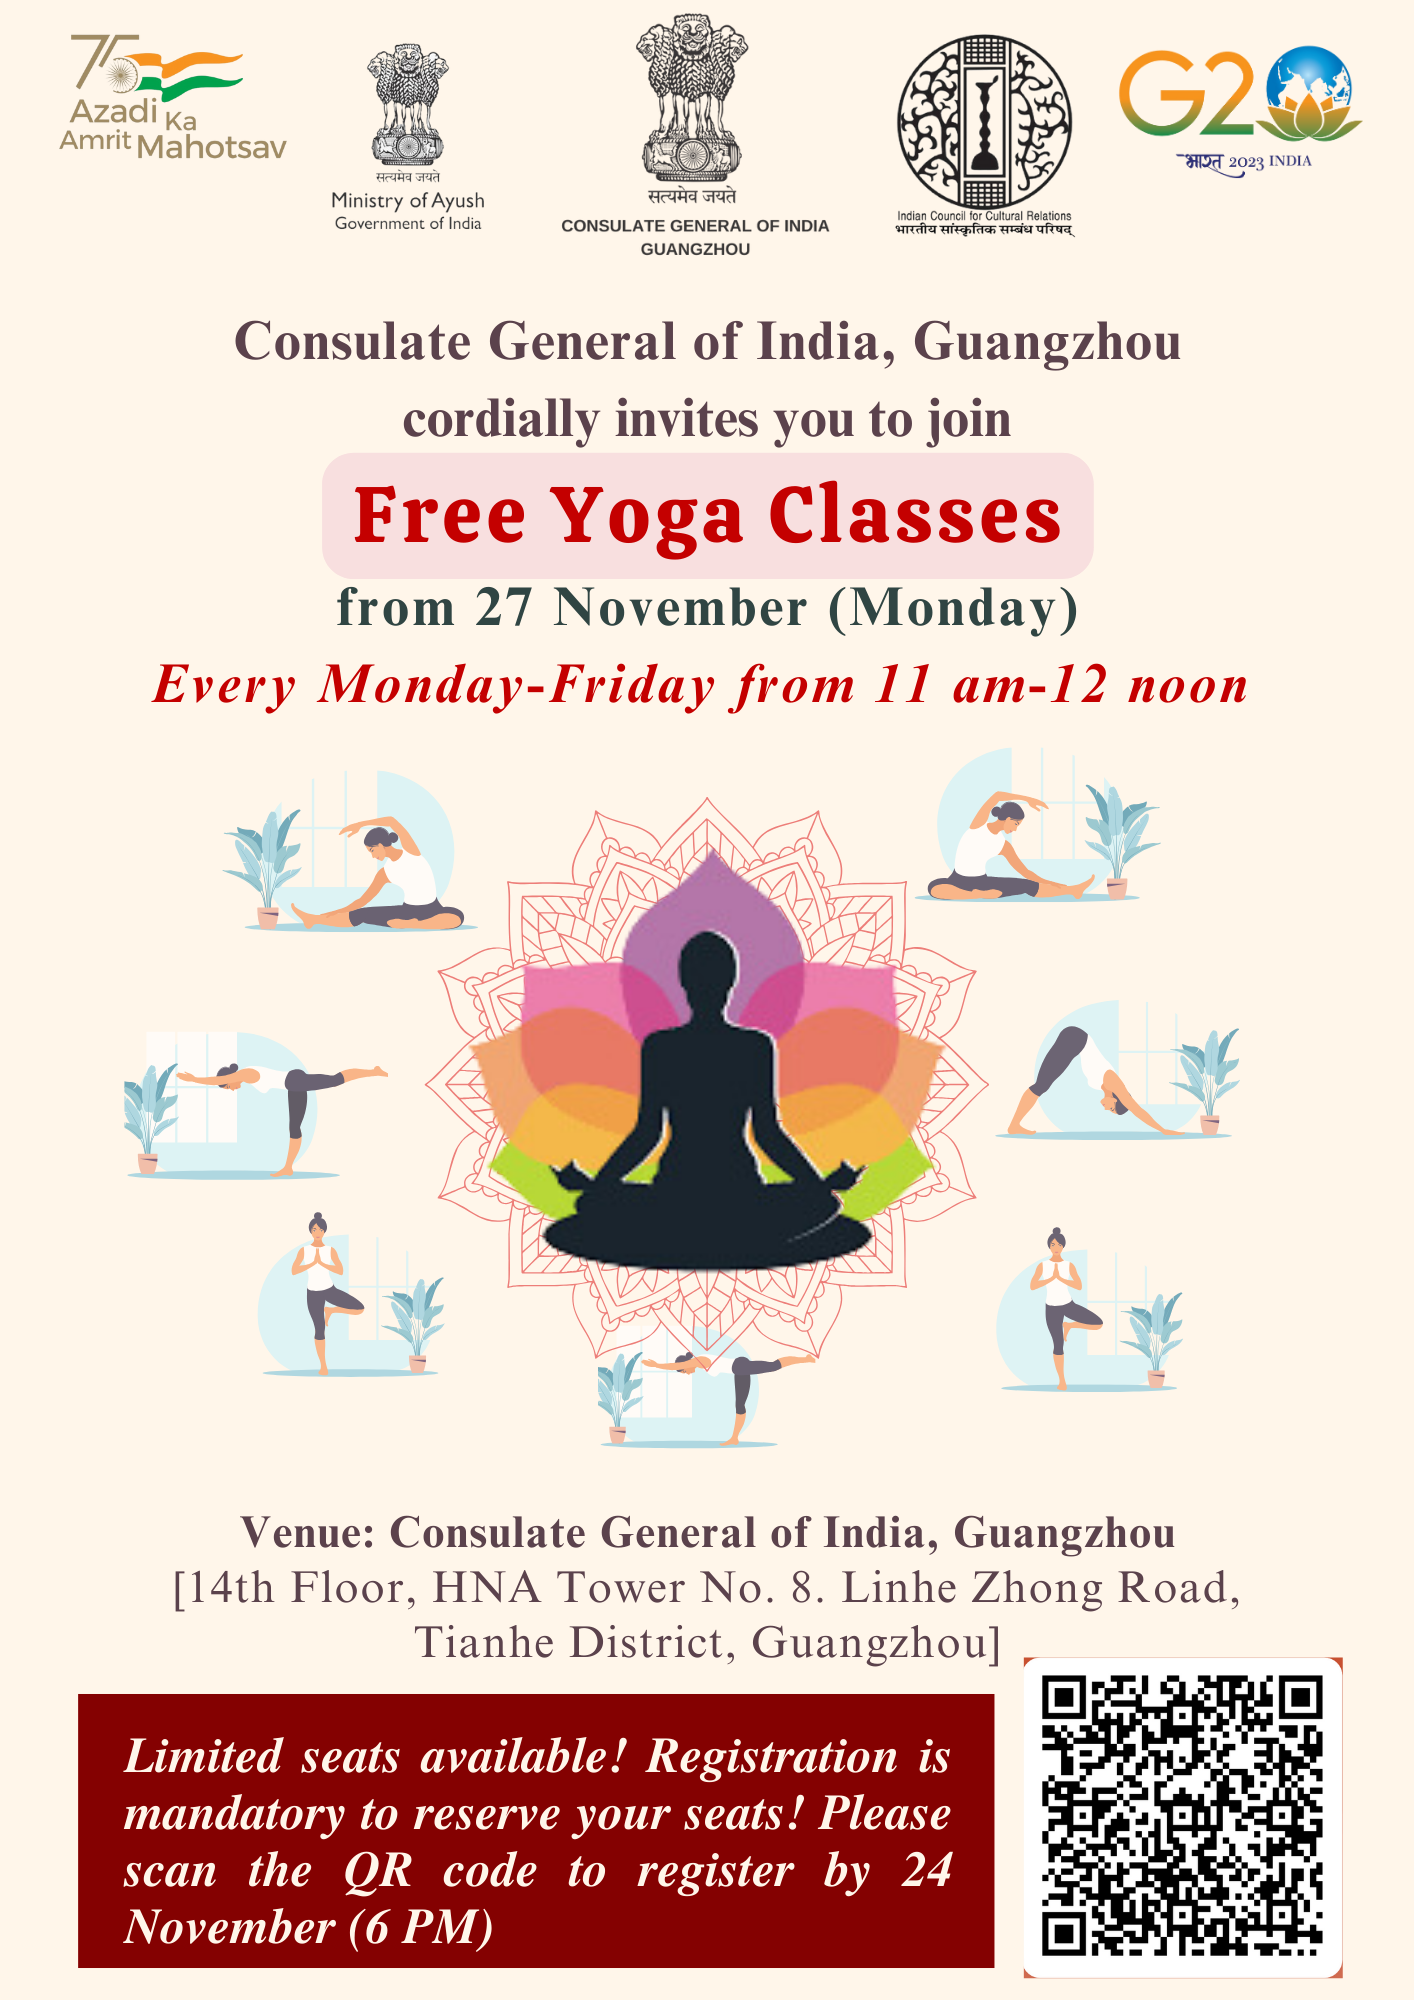 Consulate General of India, Guangzhou is organizing a 1-hour Free Yoga Class